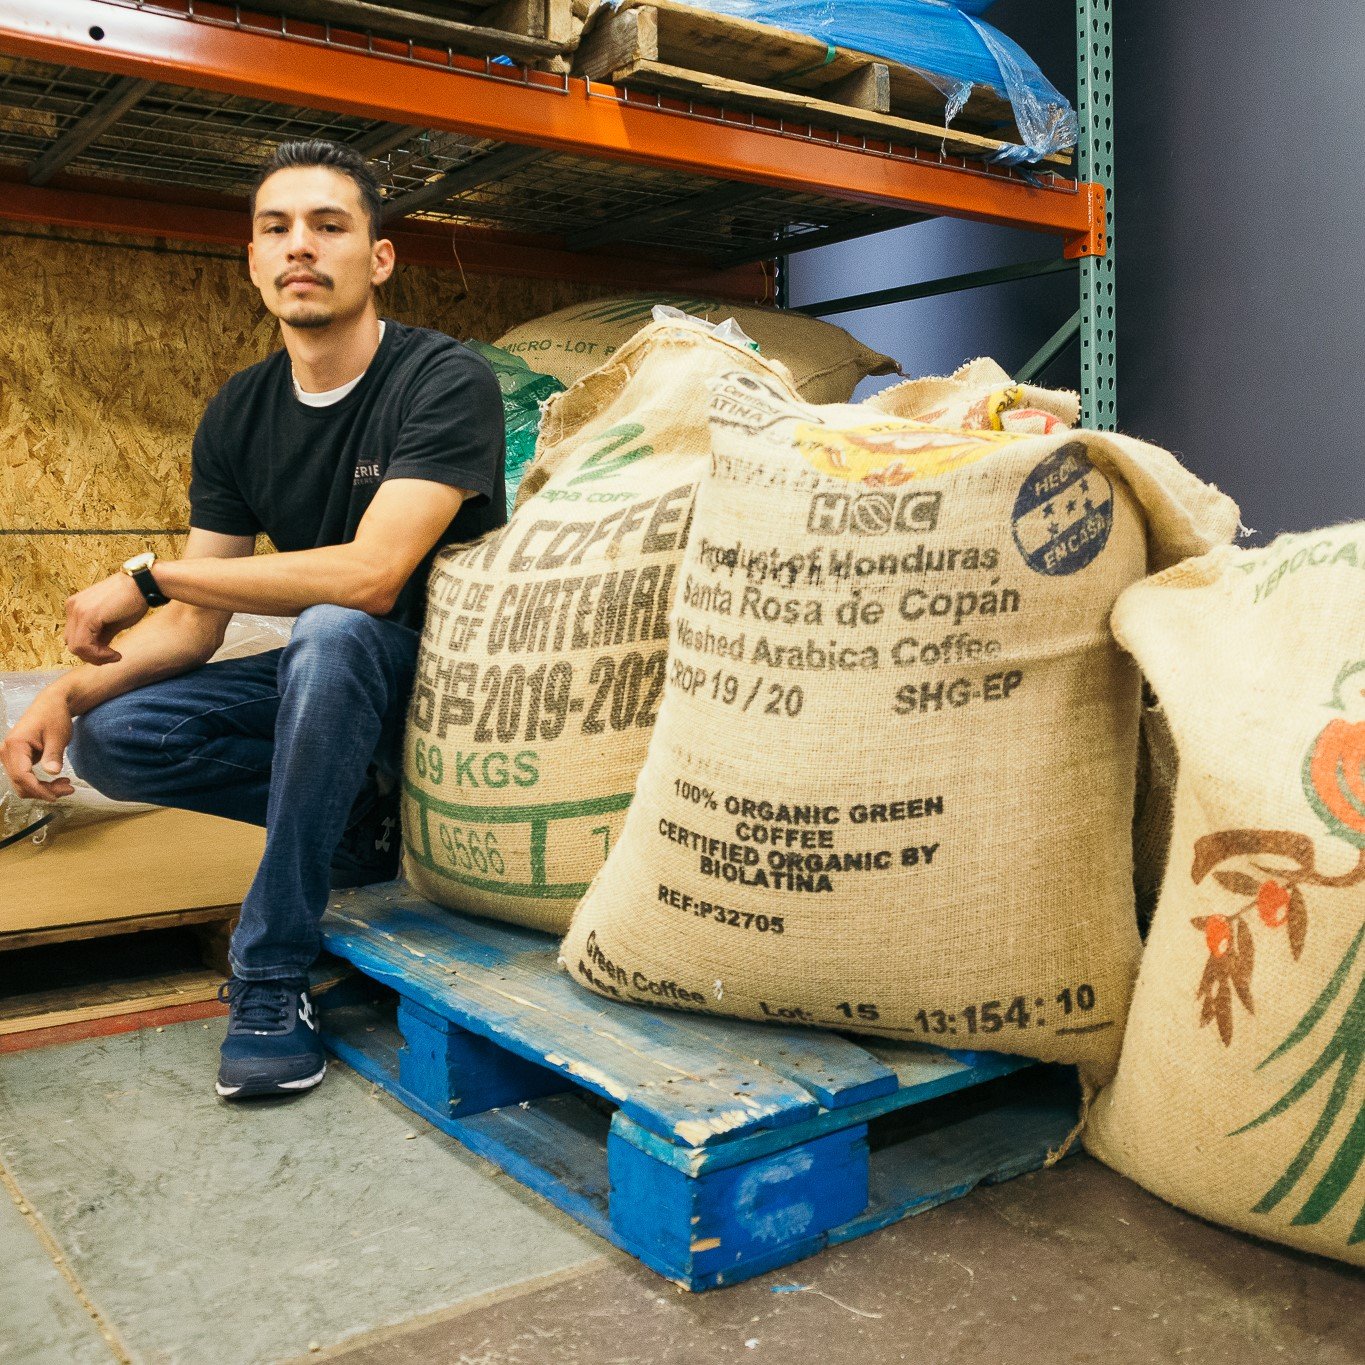 Hard to believe this, but it is Oscar's last day at Reverie. For those who don't know, Oscar has been our Lead Roaster and Director of Coffee since 2019 and has been with Reverie almost seven years. You would be hard pressed to find someone with a mo